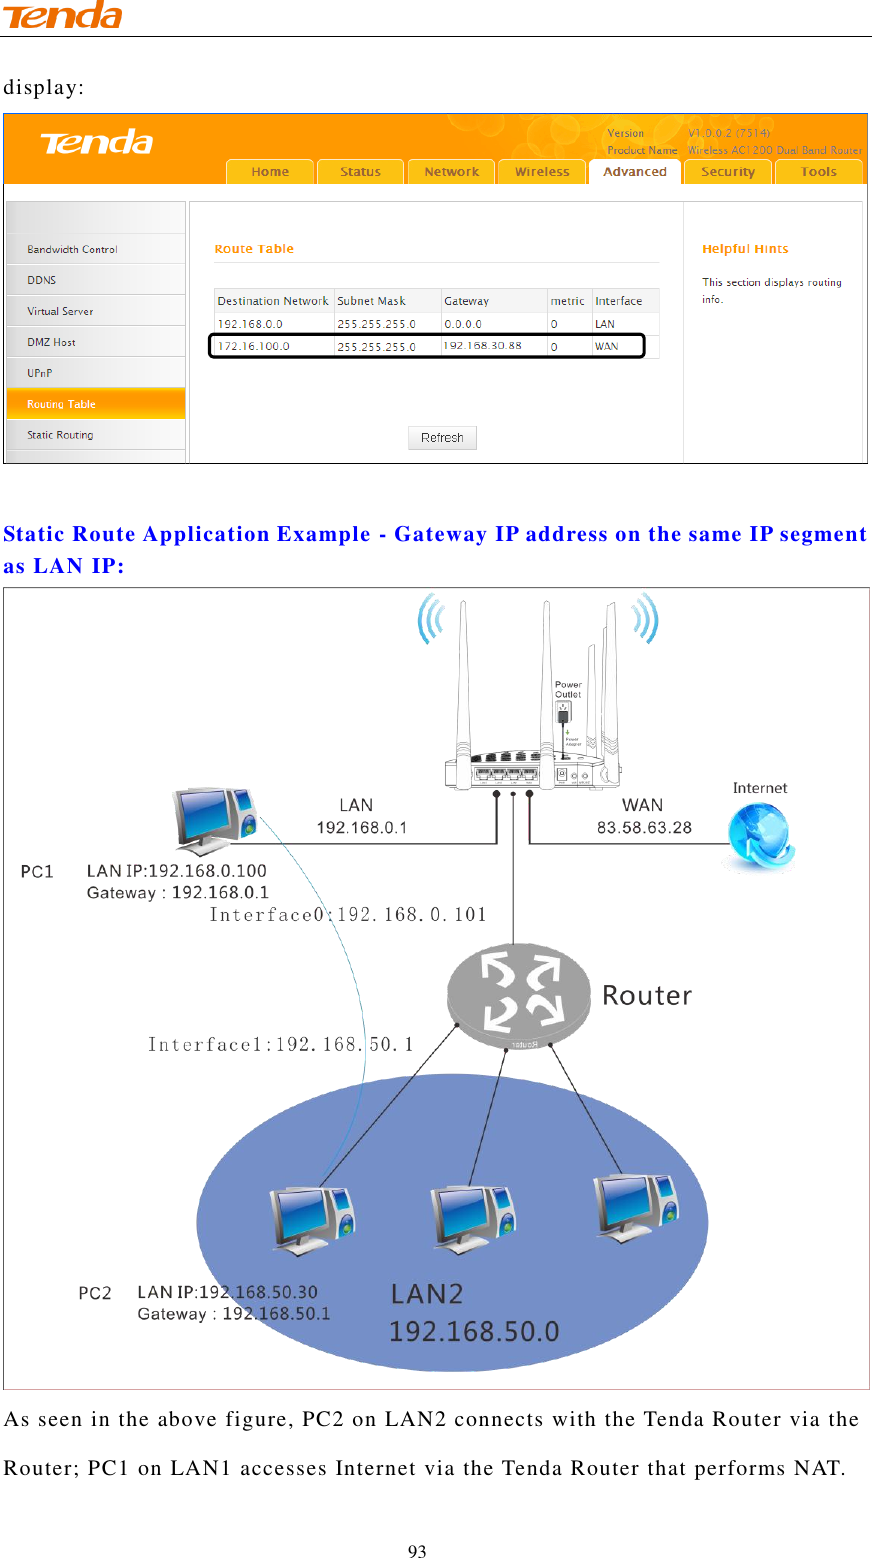                                    93 display:  Static Route Application Example - Gateway IP address on the same IP segment as LAN IP:  As seen in the above figure, PC2 on LAN2 connects with the Tenda Router via the Router; PC1 on LAN1 accesses Internet via the Tenda Router that performs NAT. 